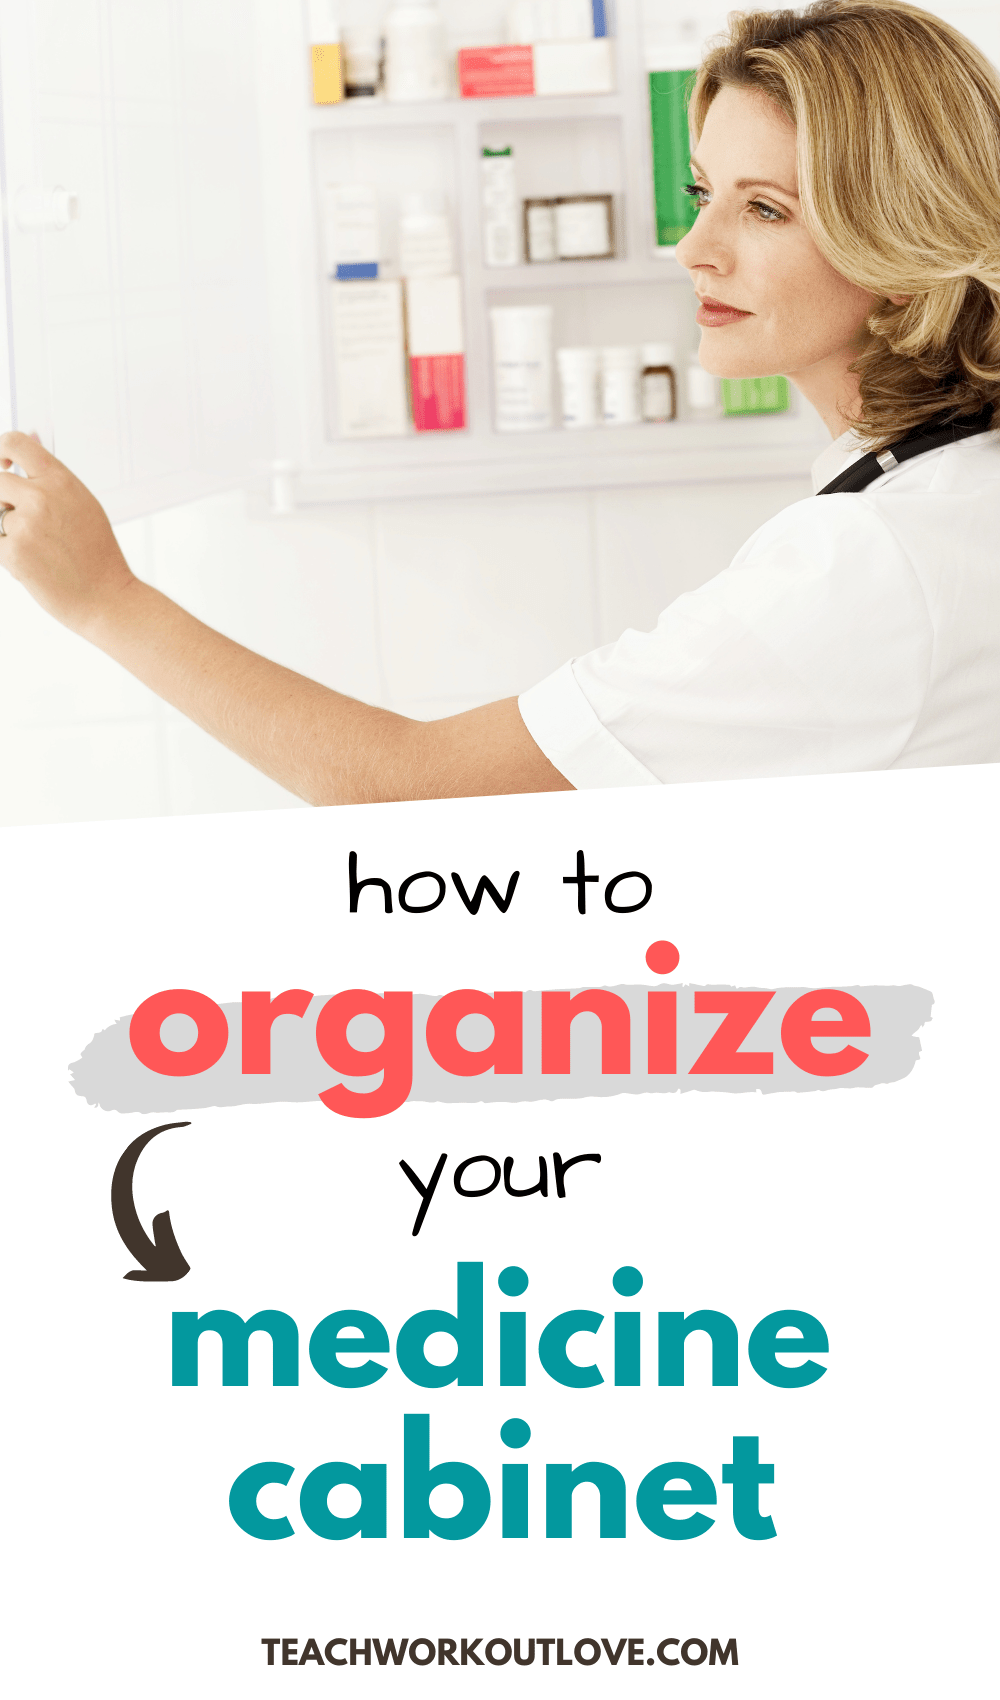 Taking medications on a daily basis can be time consuming and confusing. Check out our tips on how to keep your medications organized.